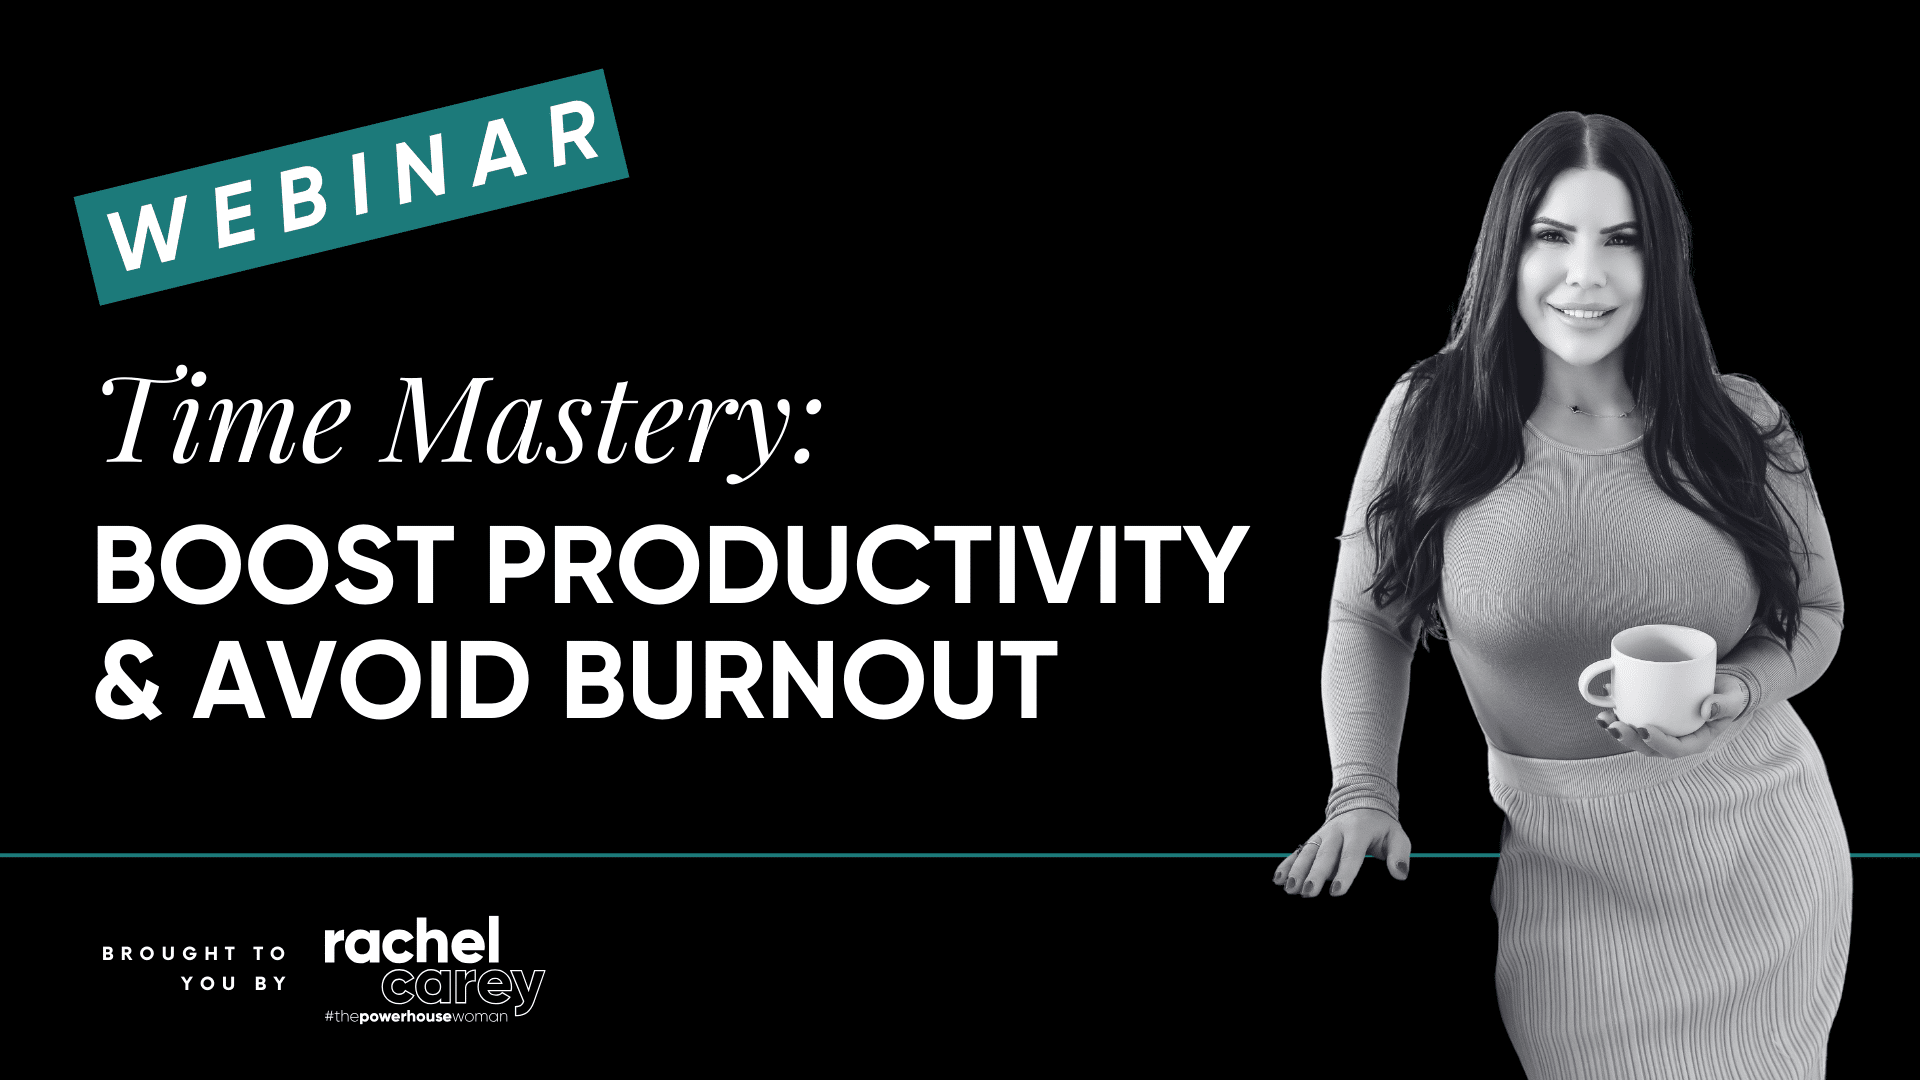 webinar time mastery boost productivity and avoid burnout online education rachel carey powerhouse collective